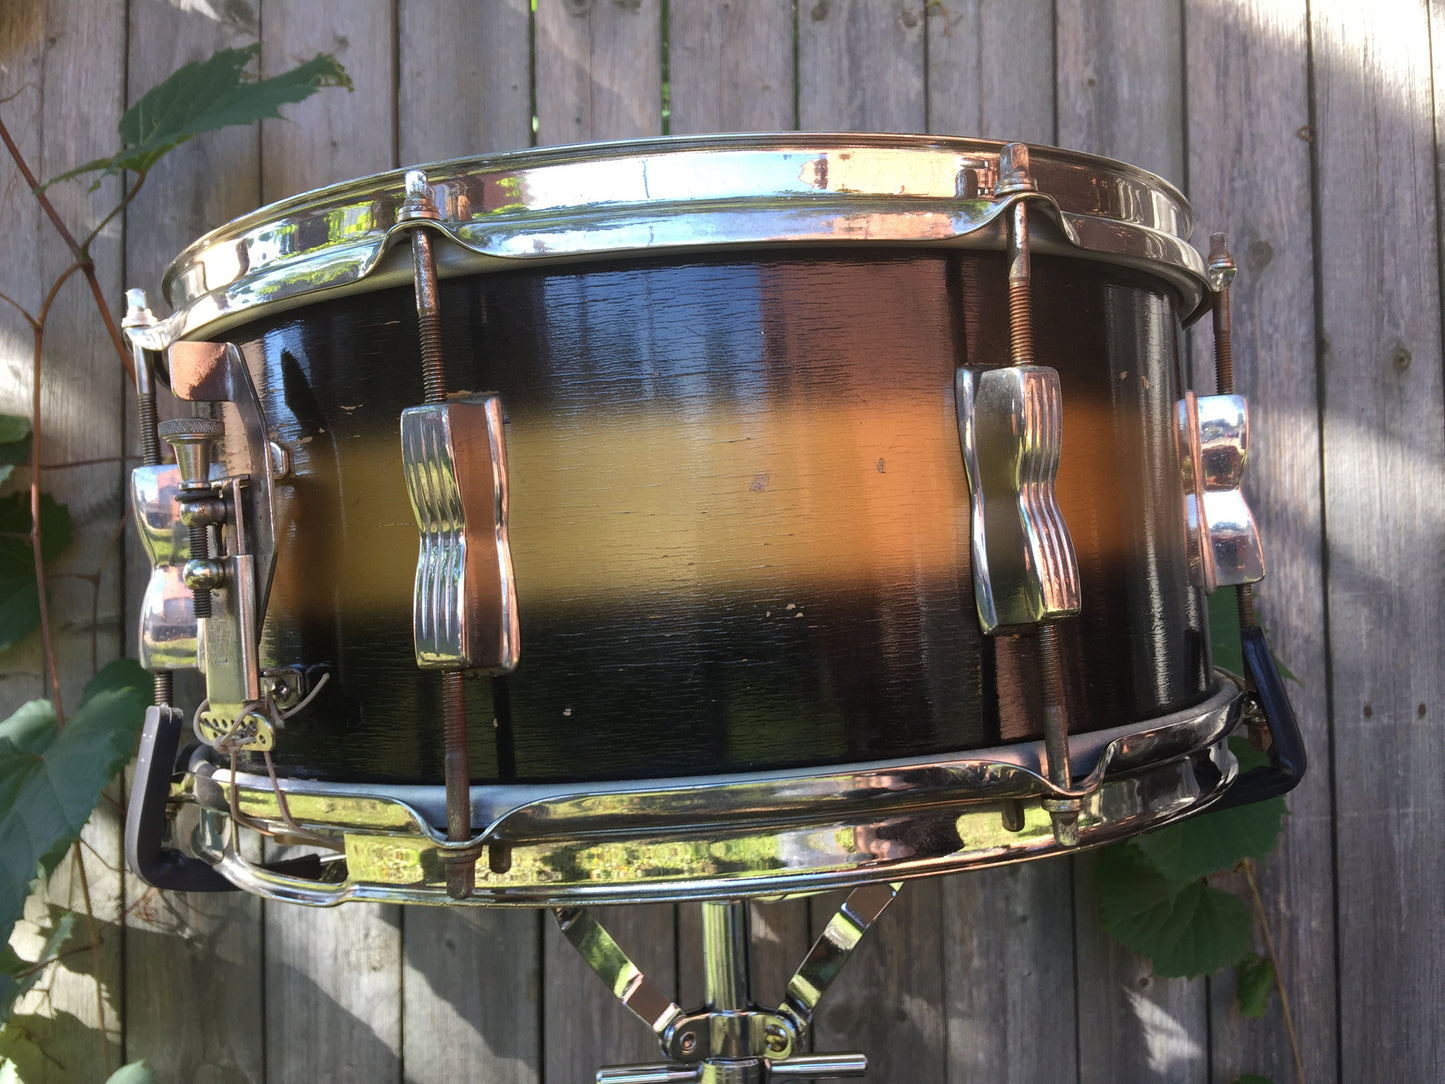 Vintage 6.5"x14" Ludwig WFL Snare Drum Black/Gold Duco